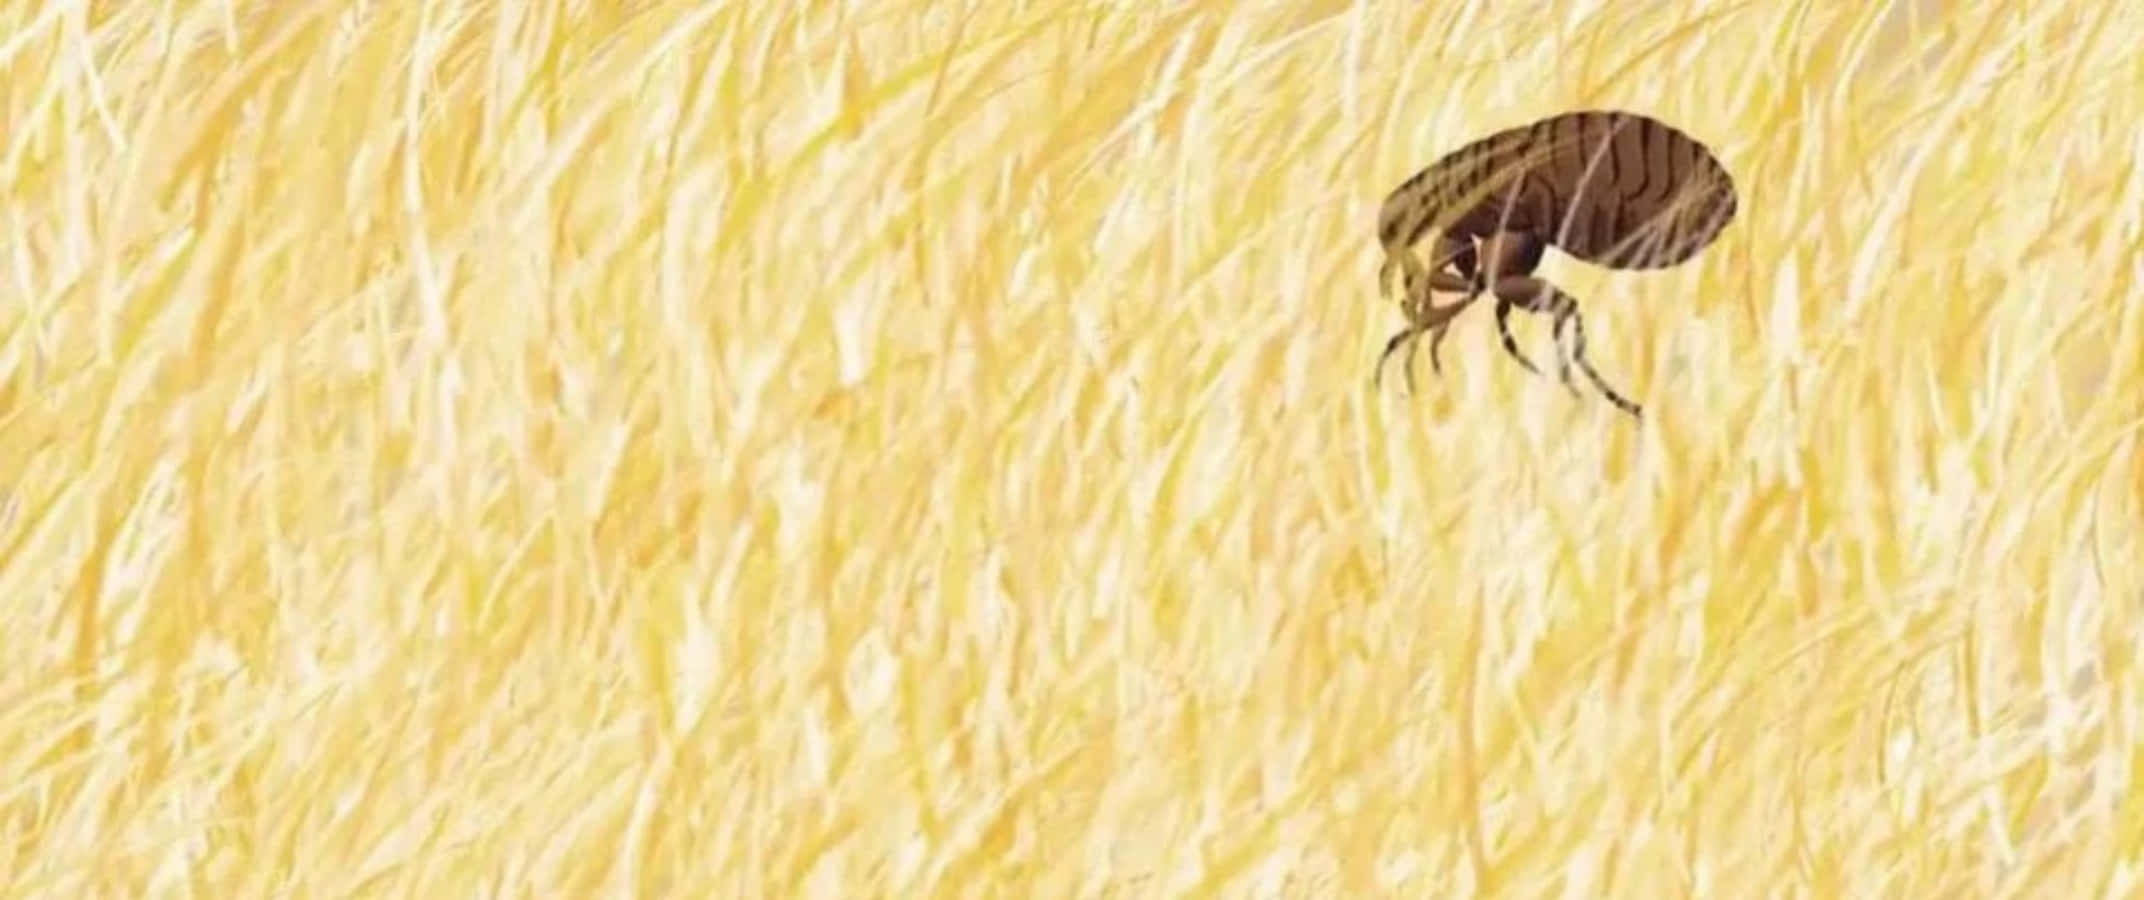 A Drawing Of A Bug In A Field Of Yellow Grass